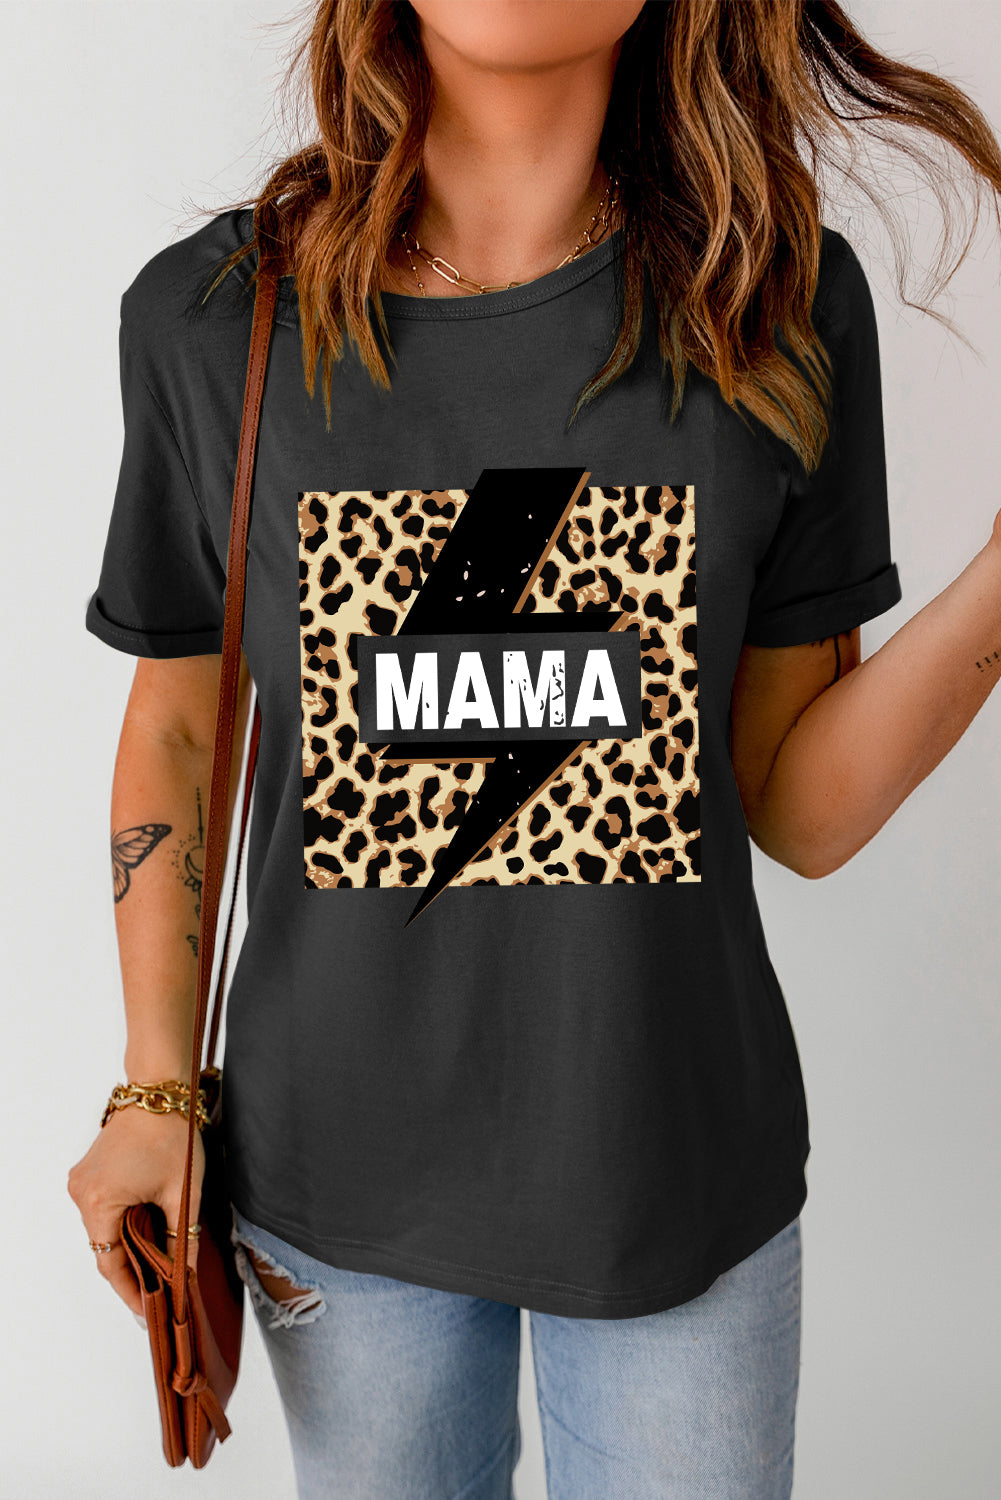 MAMA Leopard Lightning Graphic Tee Shirt - Cheeky Chic Boutique